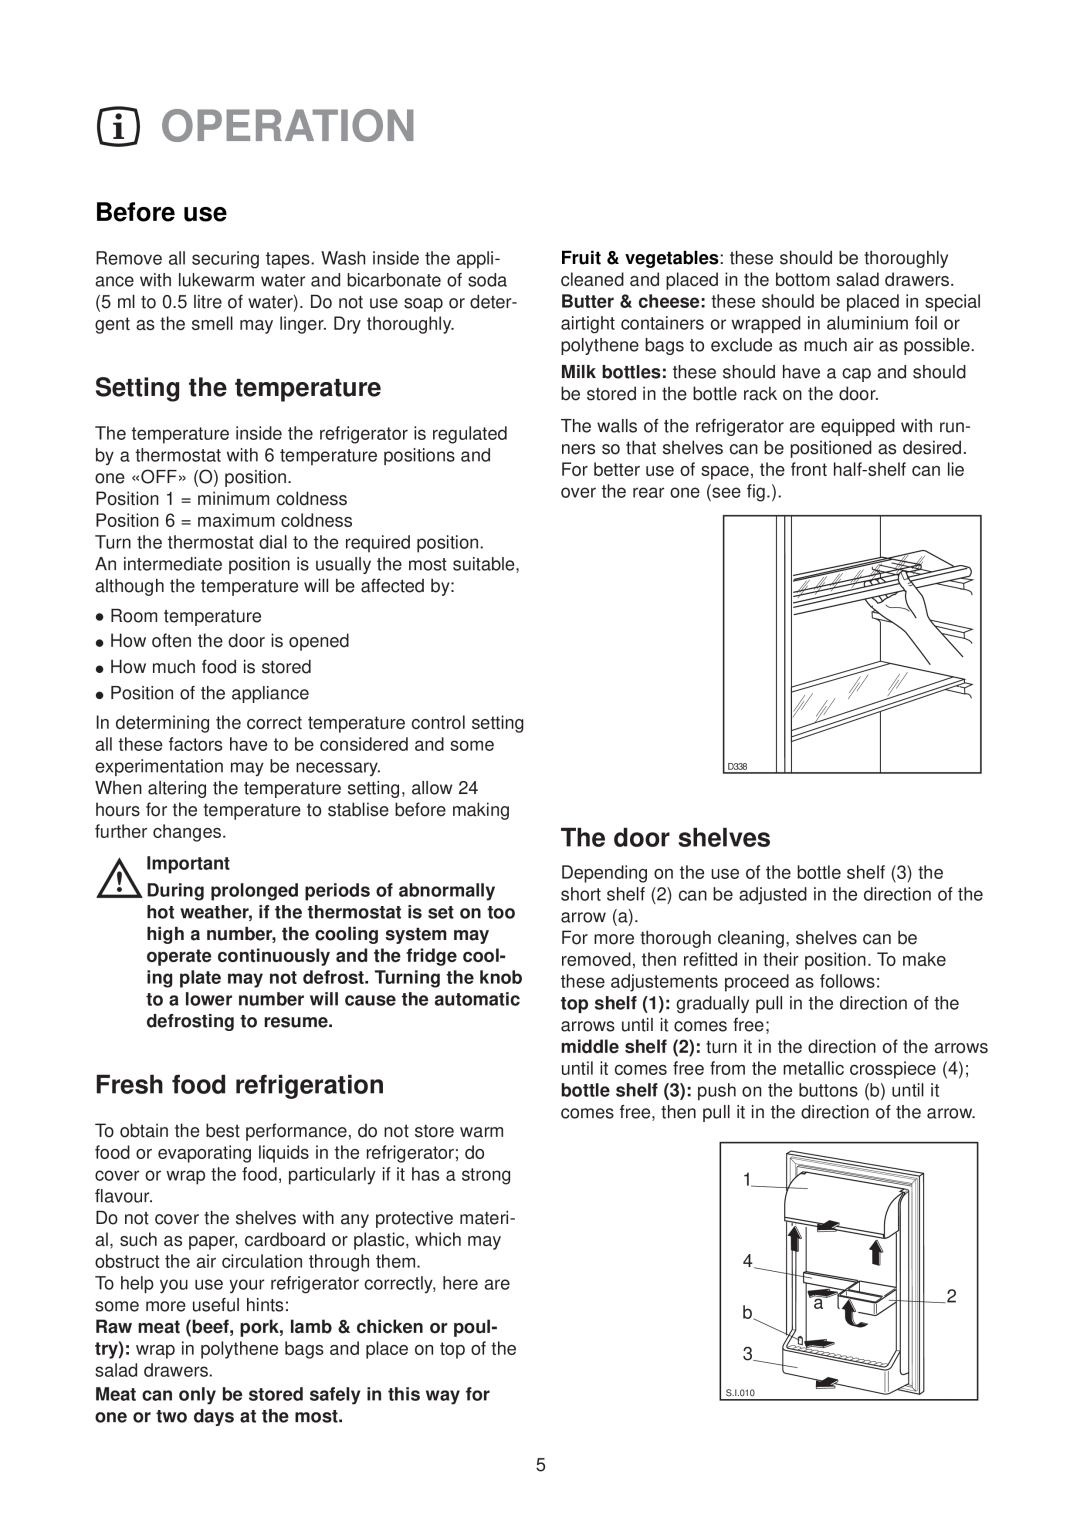 Zanussi ZU 9124 manual Operation, Before use, Setting the temperature, Fresh food refrigeration, The door shelves 